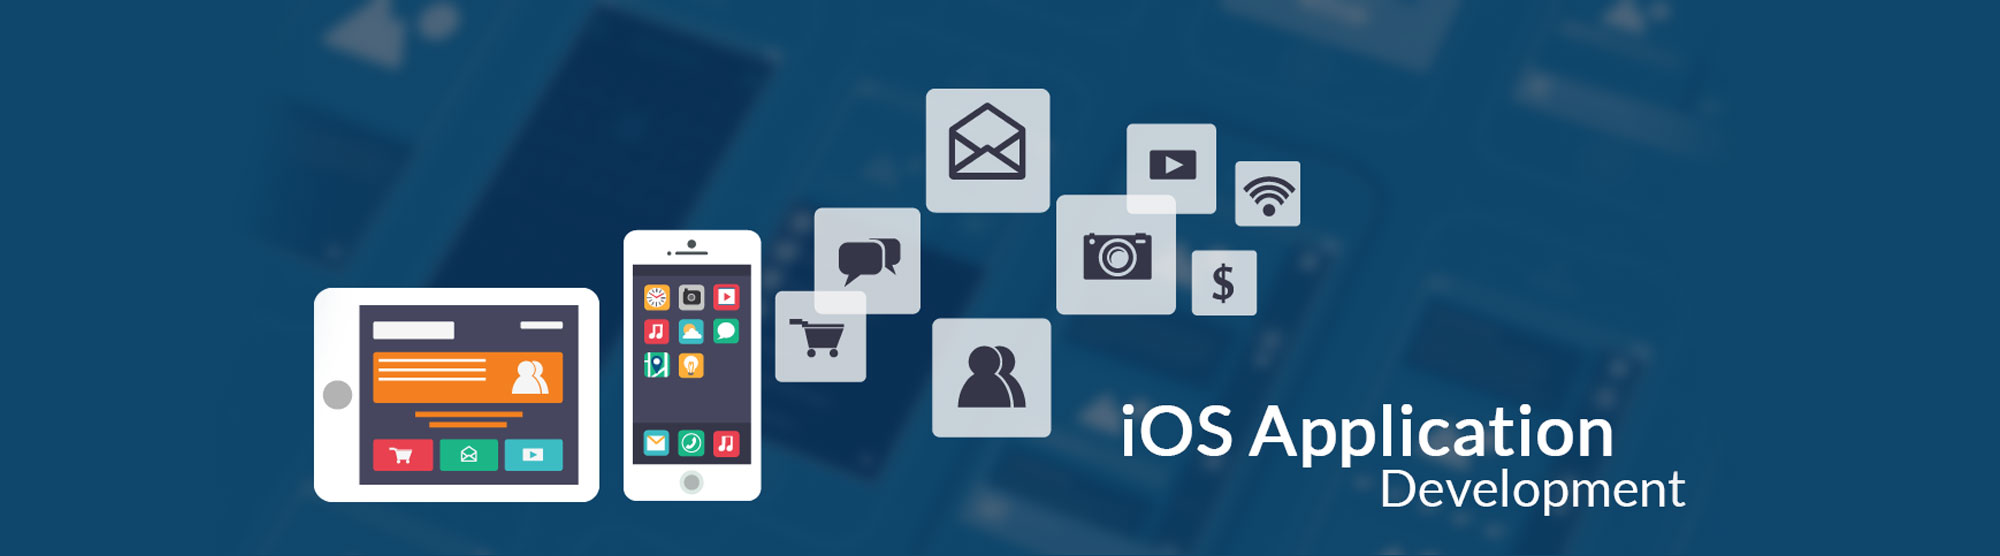 iOS App Development – Do You Need To Invest in iPhone/iPad Apps?